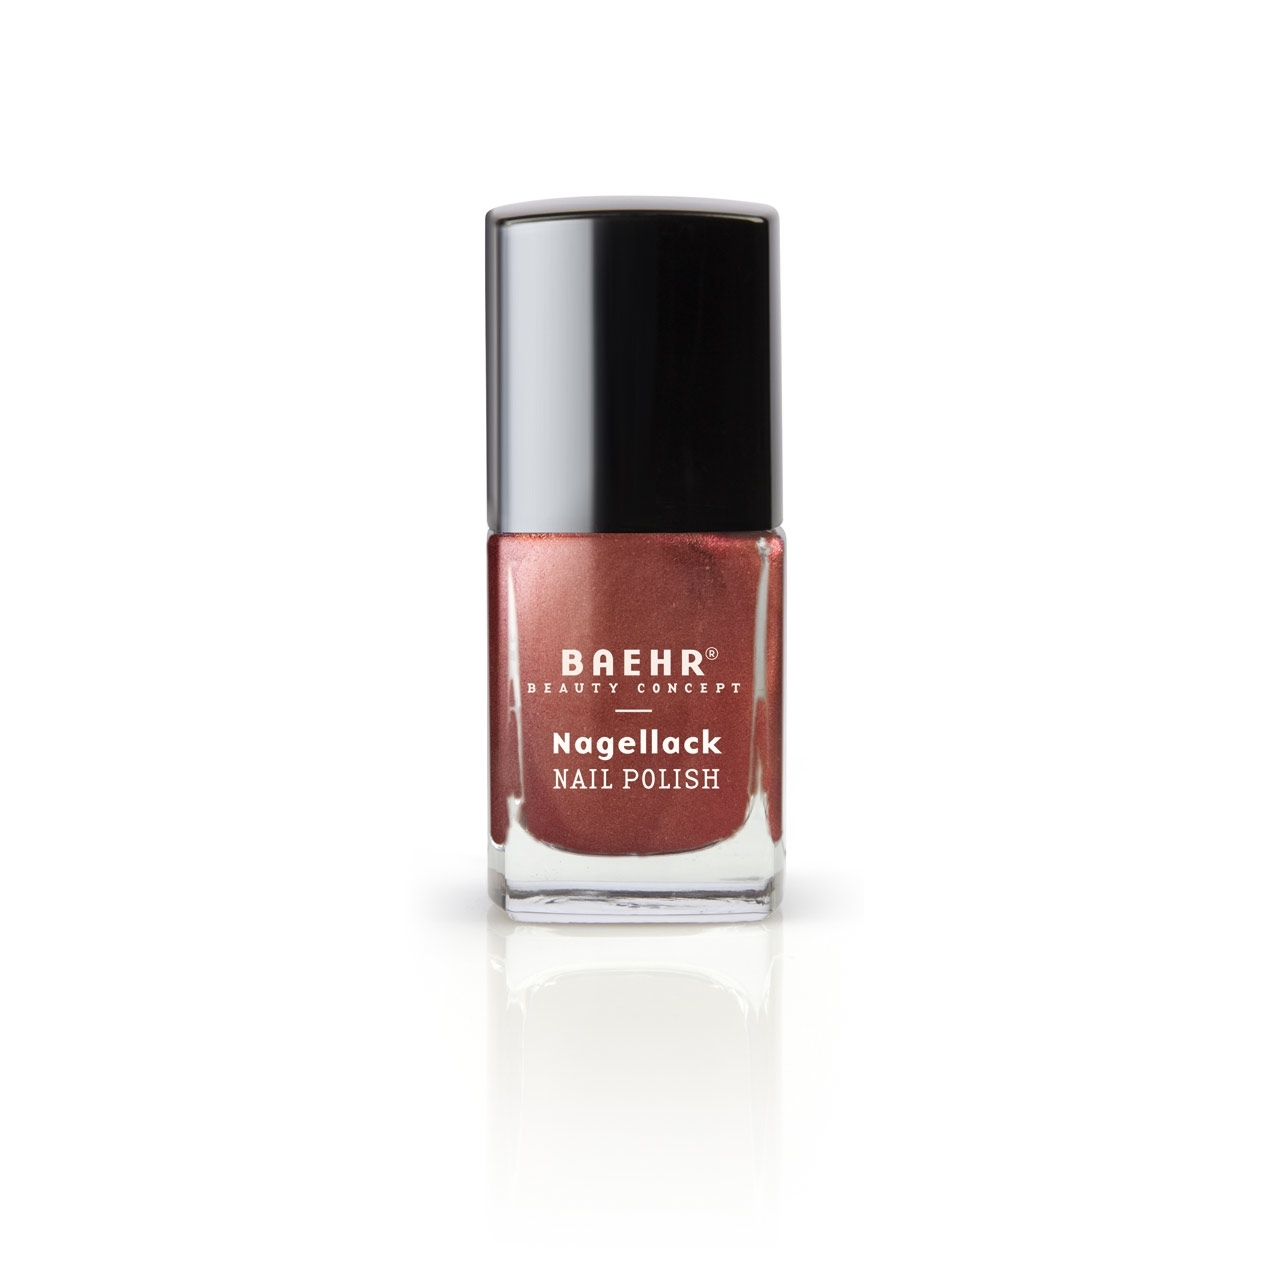 BAEHR BEAUTY CONCEPT - NAILS Nagellack chestnut pearl 11 ml